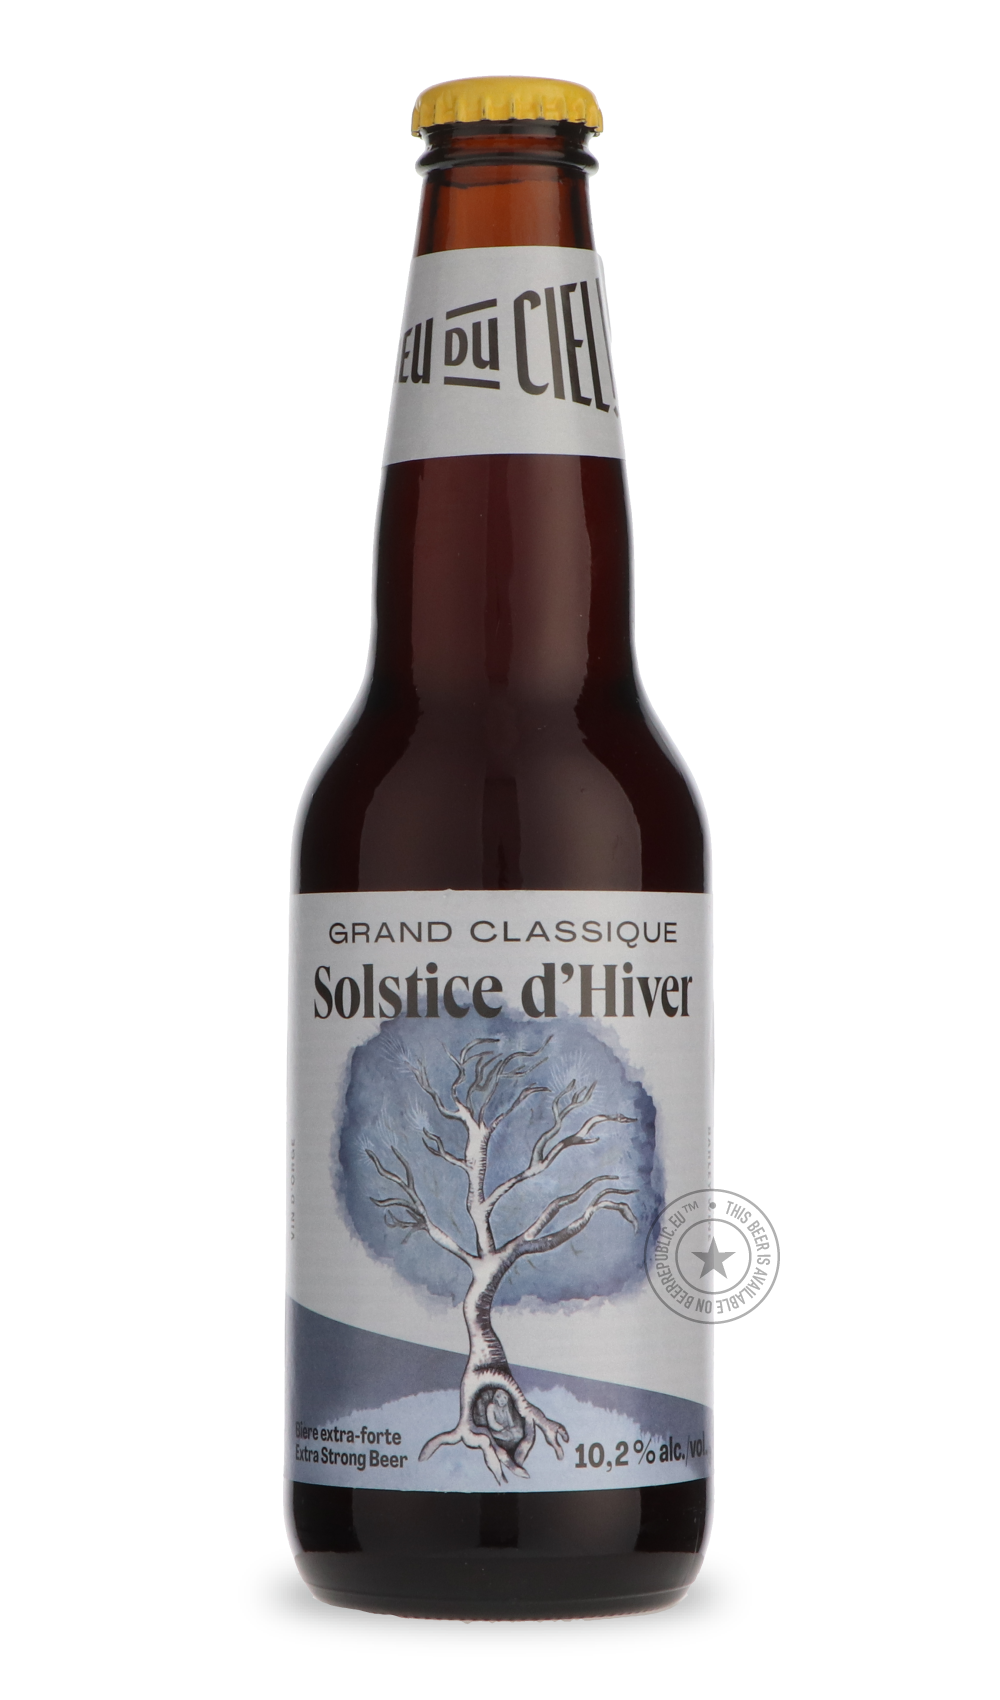 -Dieu du Ciel- Solstice d'Hiver-Brown & Dark- Only @ Beer Republic - The best online beer store for American & Canadian craft beer - Buy beer online from the USA and Canada - Bier online kopen - Amerikaans bier kopen - Craft beer store - Craft beer kopen - Amerikanisch bier kaufen - Bier online kaufen - Acheter biere online - IPA - Stout - Porter - New England IPA - Hazy IPA - Imperial Stout - Barrel Aged - Barrel Aged Imperial Stout - Brown - Dark beer - Blond - Blonde - Pilsner - Lager - Wheat - Weizen - 